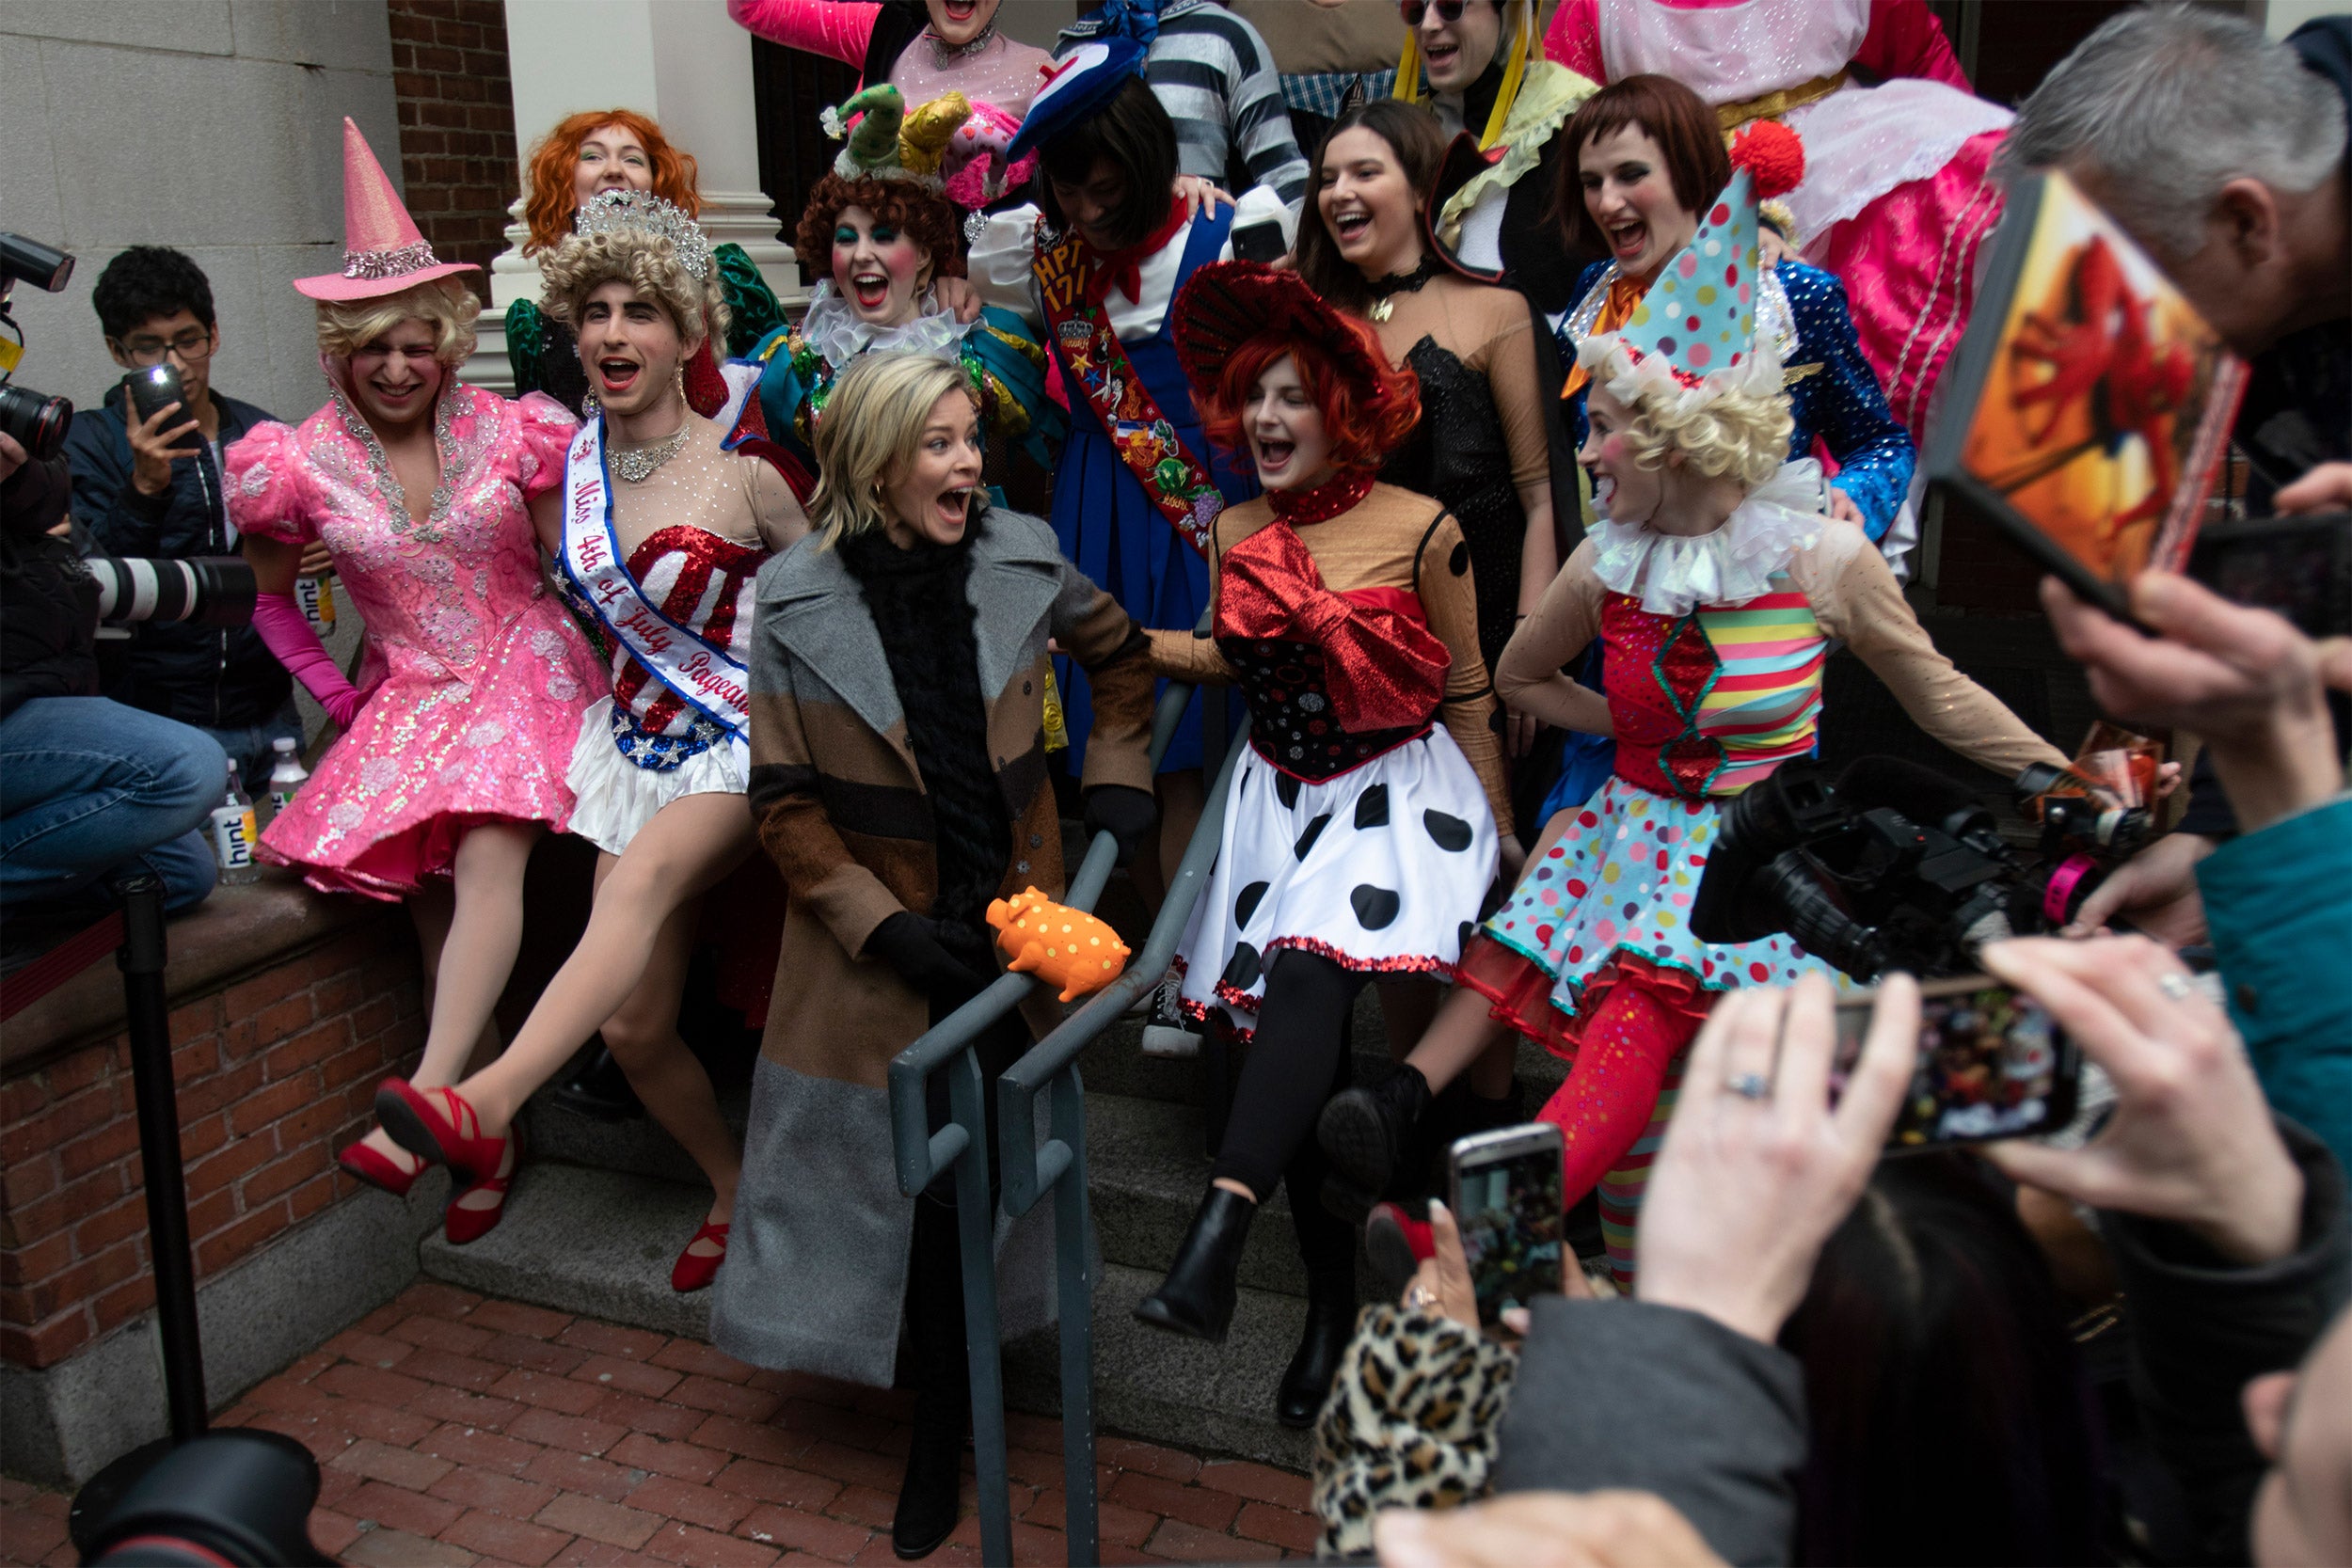 Elizabeth banks surrounded by colorful characters